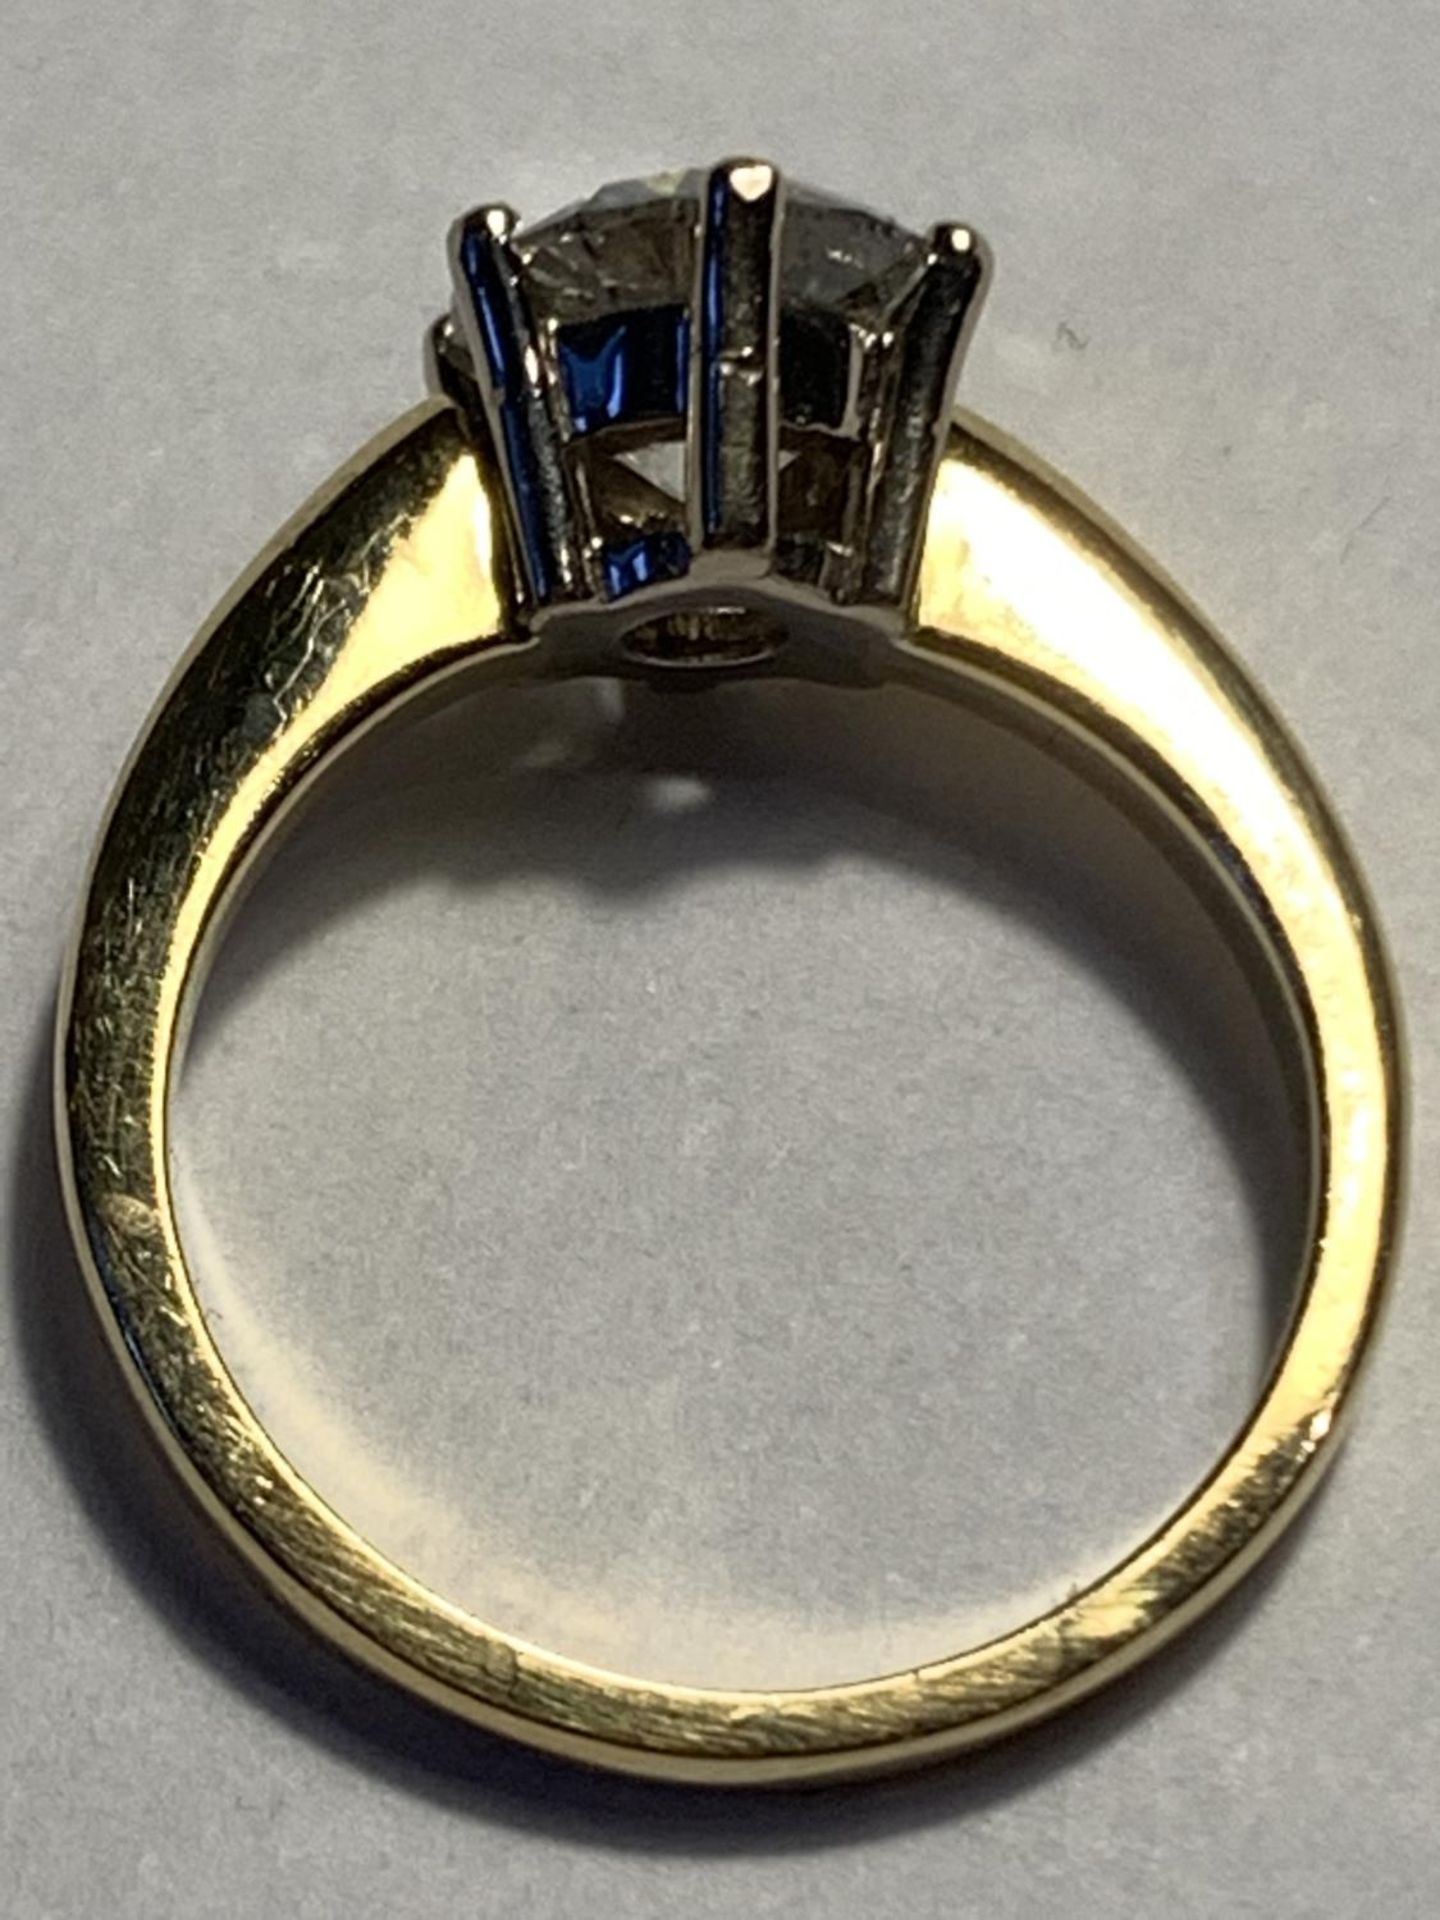 AN 18 CARAT GOLD RING WITH A 1.5 CARAT ROUND CUT DIAMOND SIZE J/K - Image 4 of 5